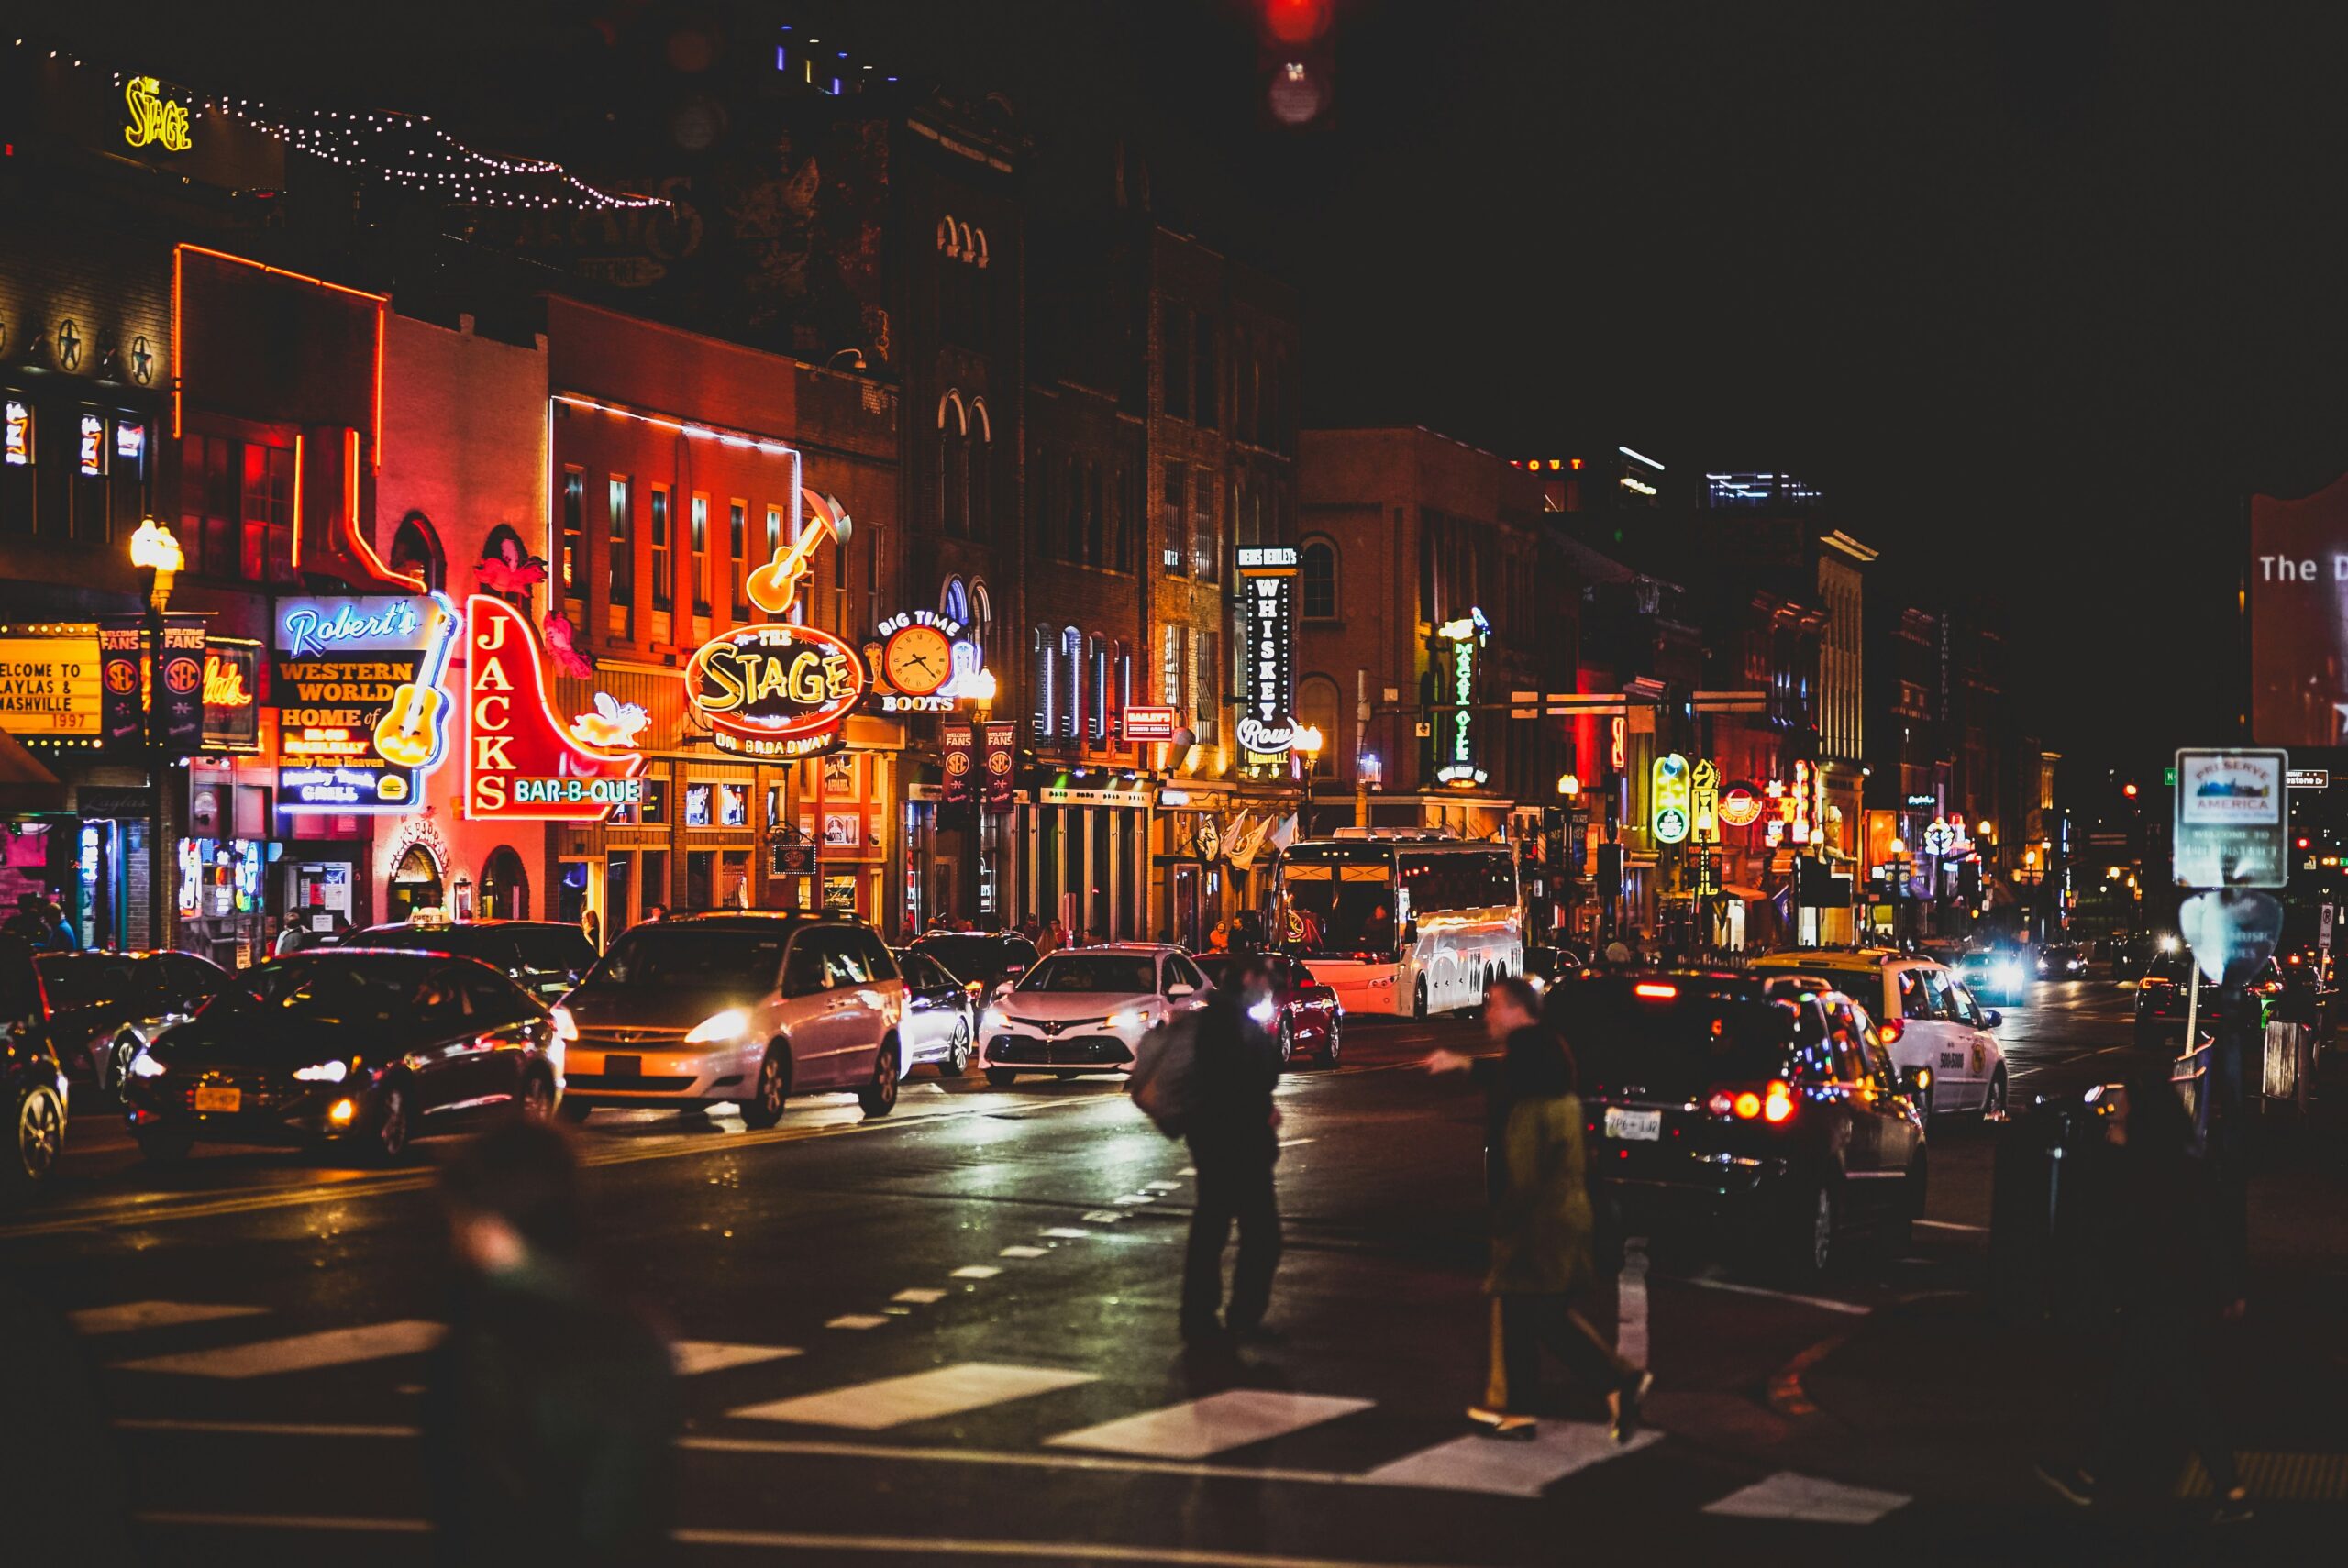 Downtown Nashville is one of the best neighborhoods in Nashville for bars, clubs, nightlife and more. Pictured: Downtown Nashville at night